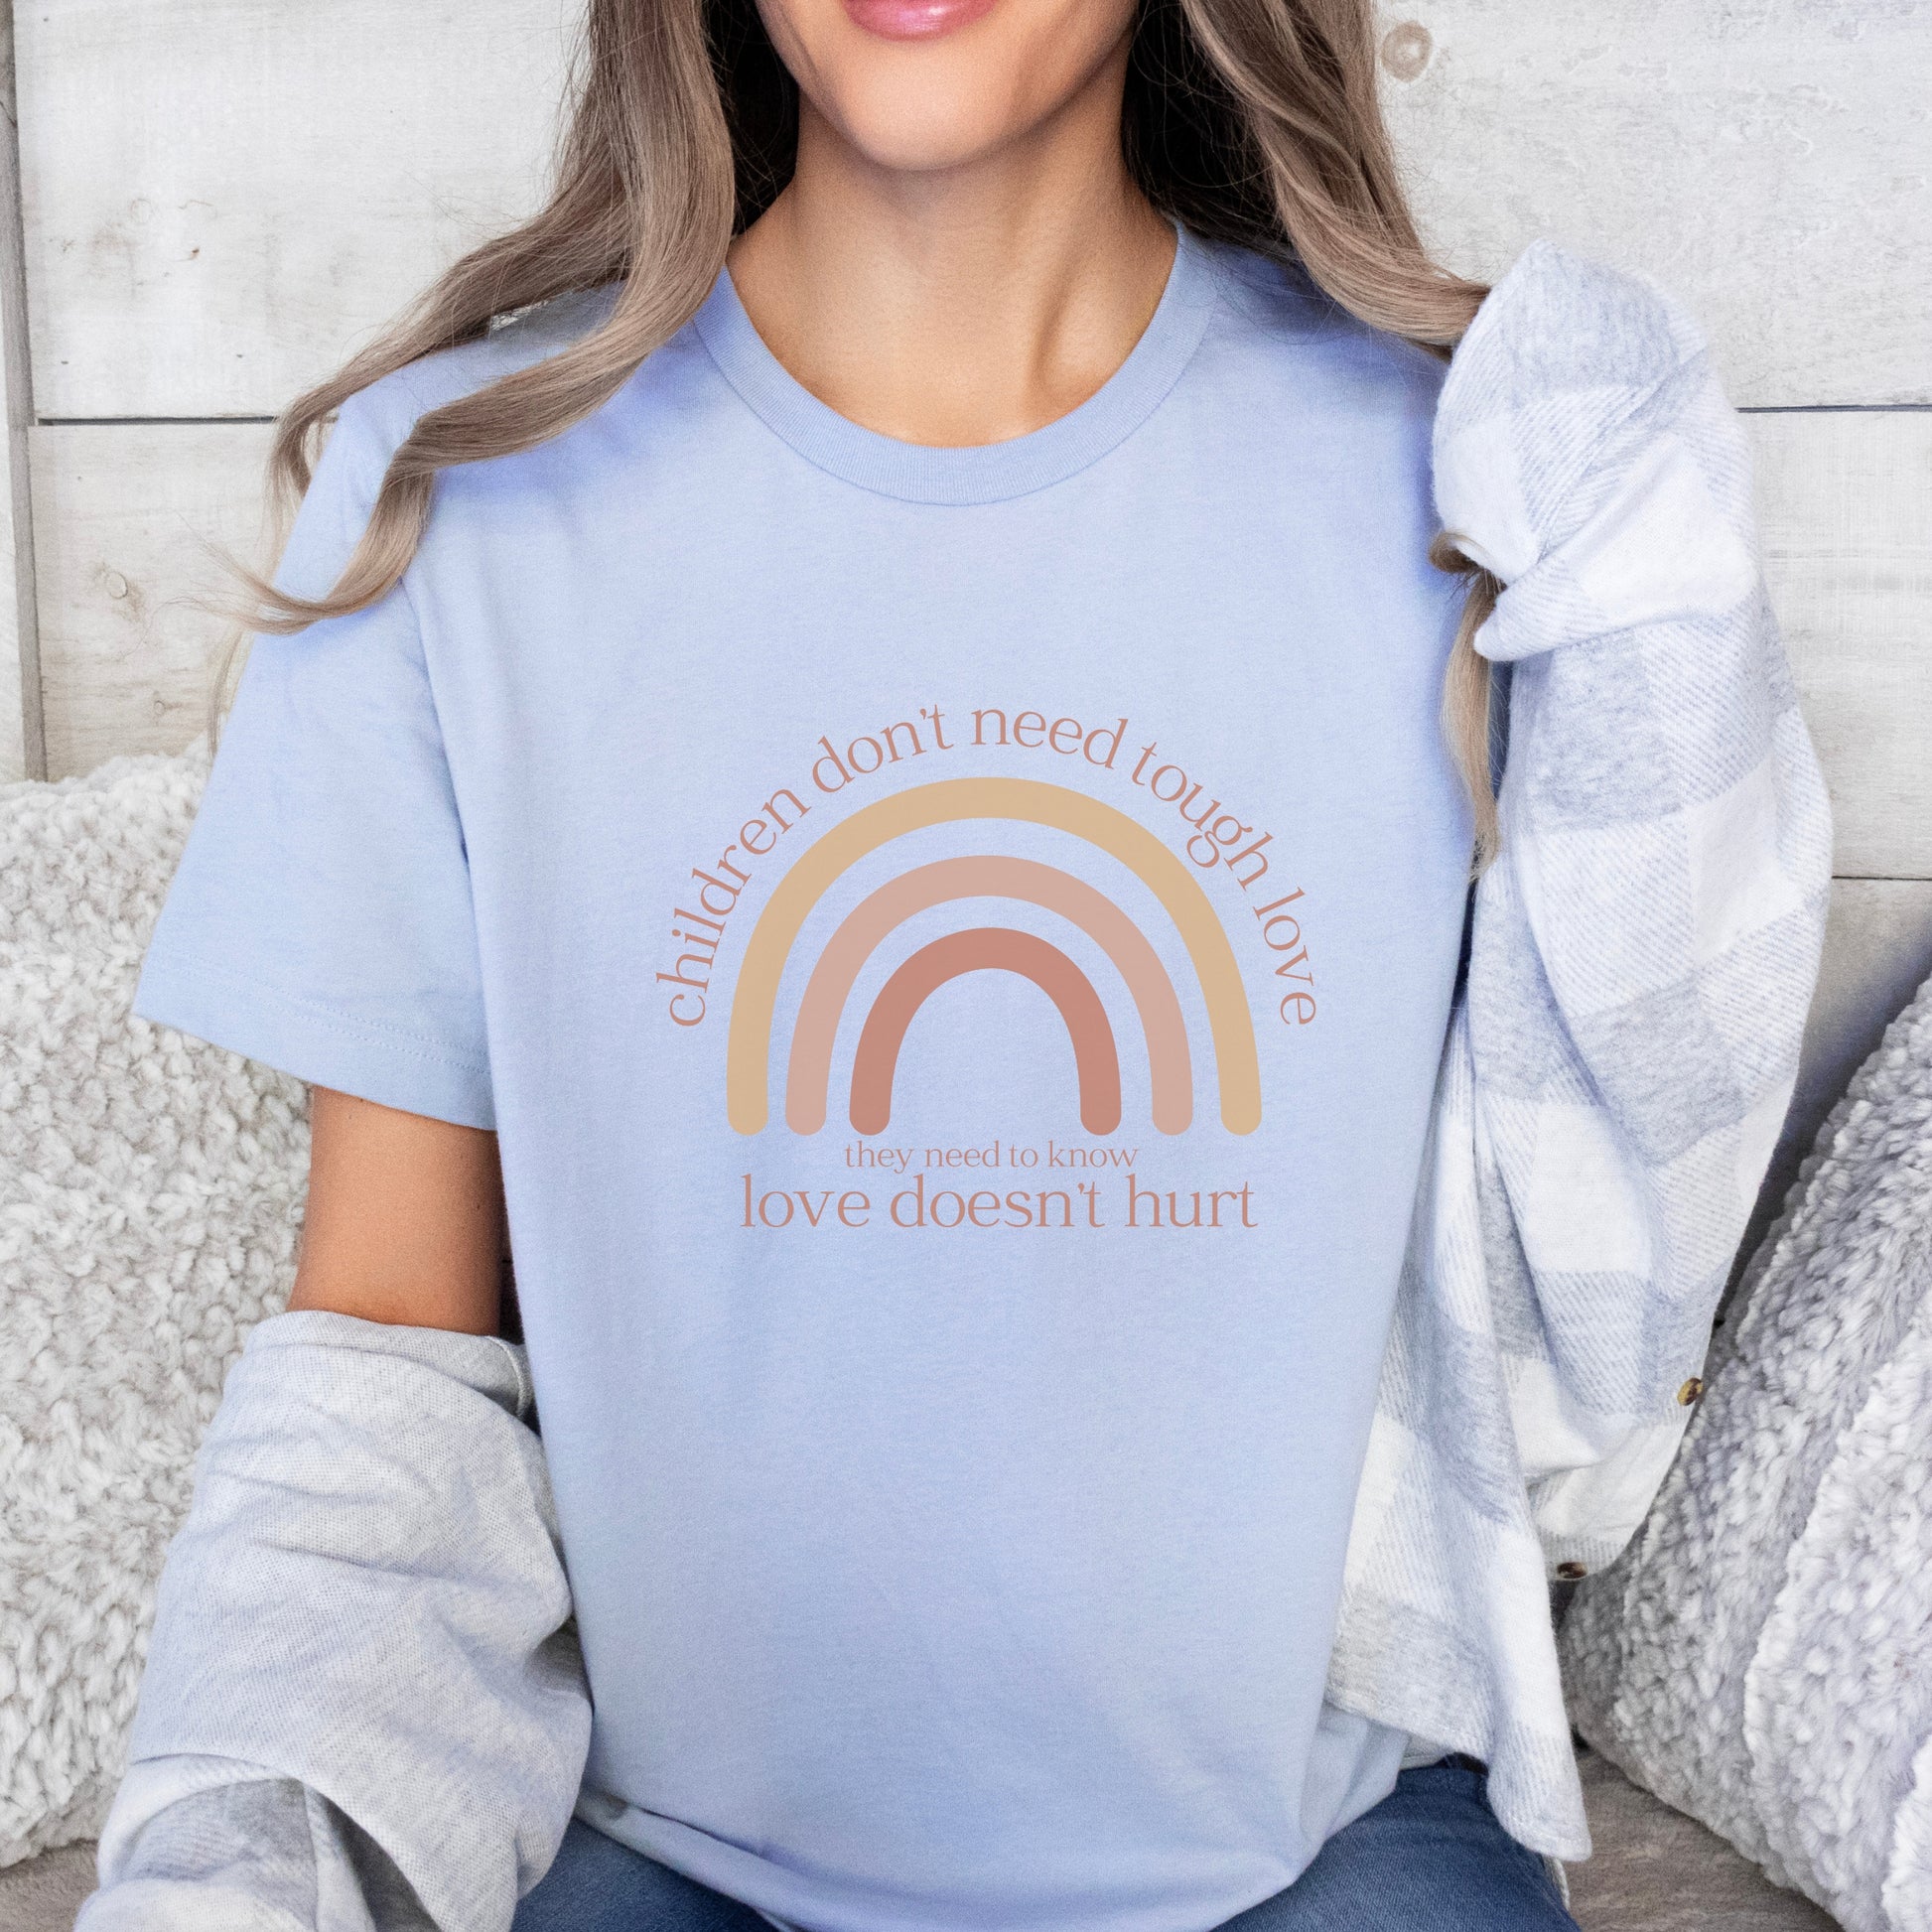 The front of the t-shirt has a beautiful boho rainbow that boldly declares, "Children don't need tough love, they need to know love doesn't hurt." It serves as a rallying cry for advocates, emphasizing the importance of fostering environments where love is synonymous with safety and support. Perfect for child advocates, family advocates, and Child Abuse Awareness and Prevention Month CAPM